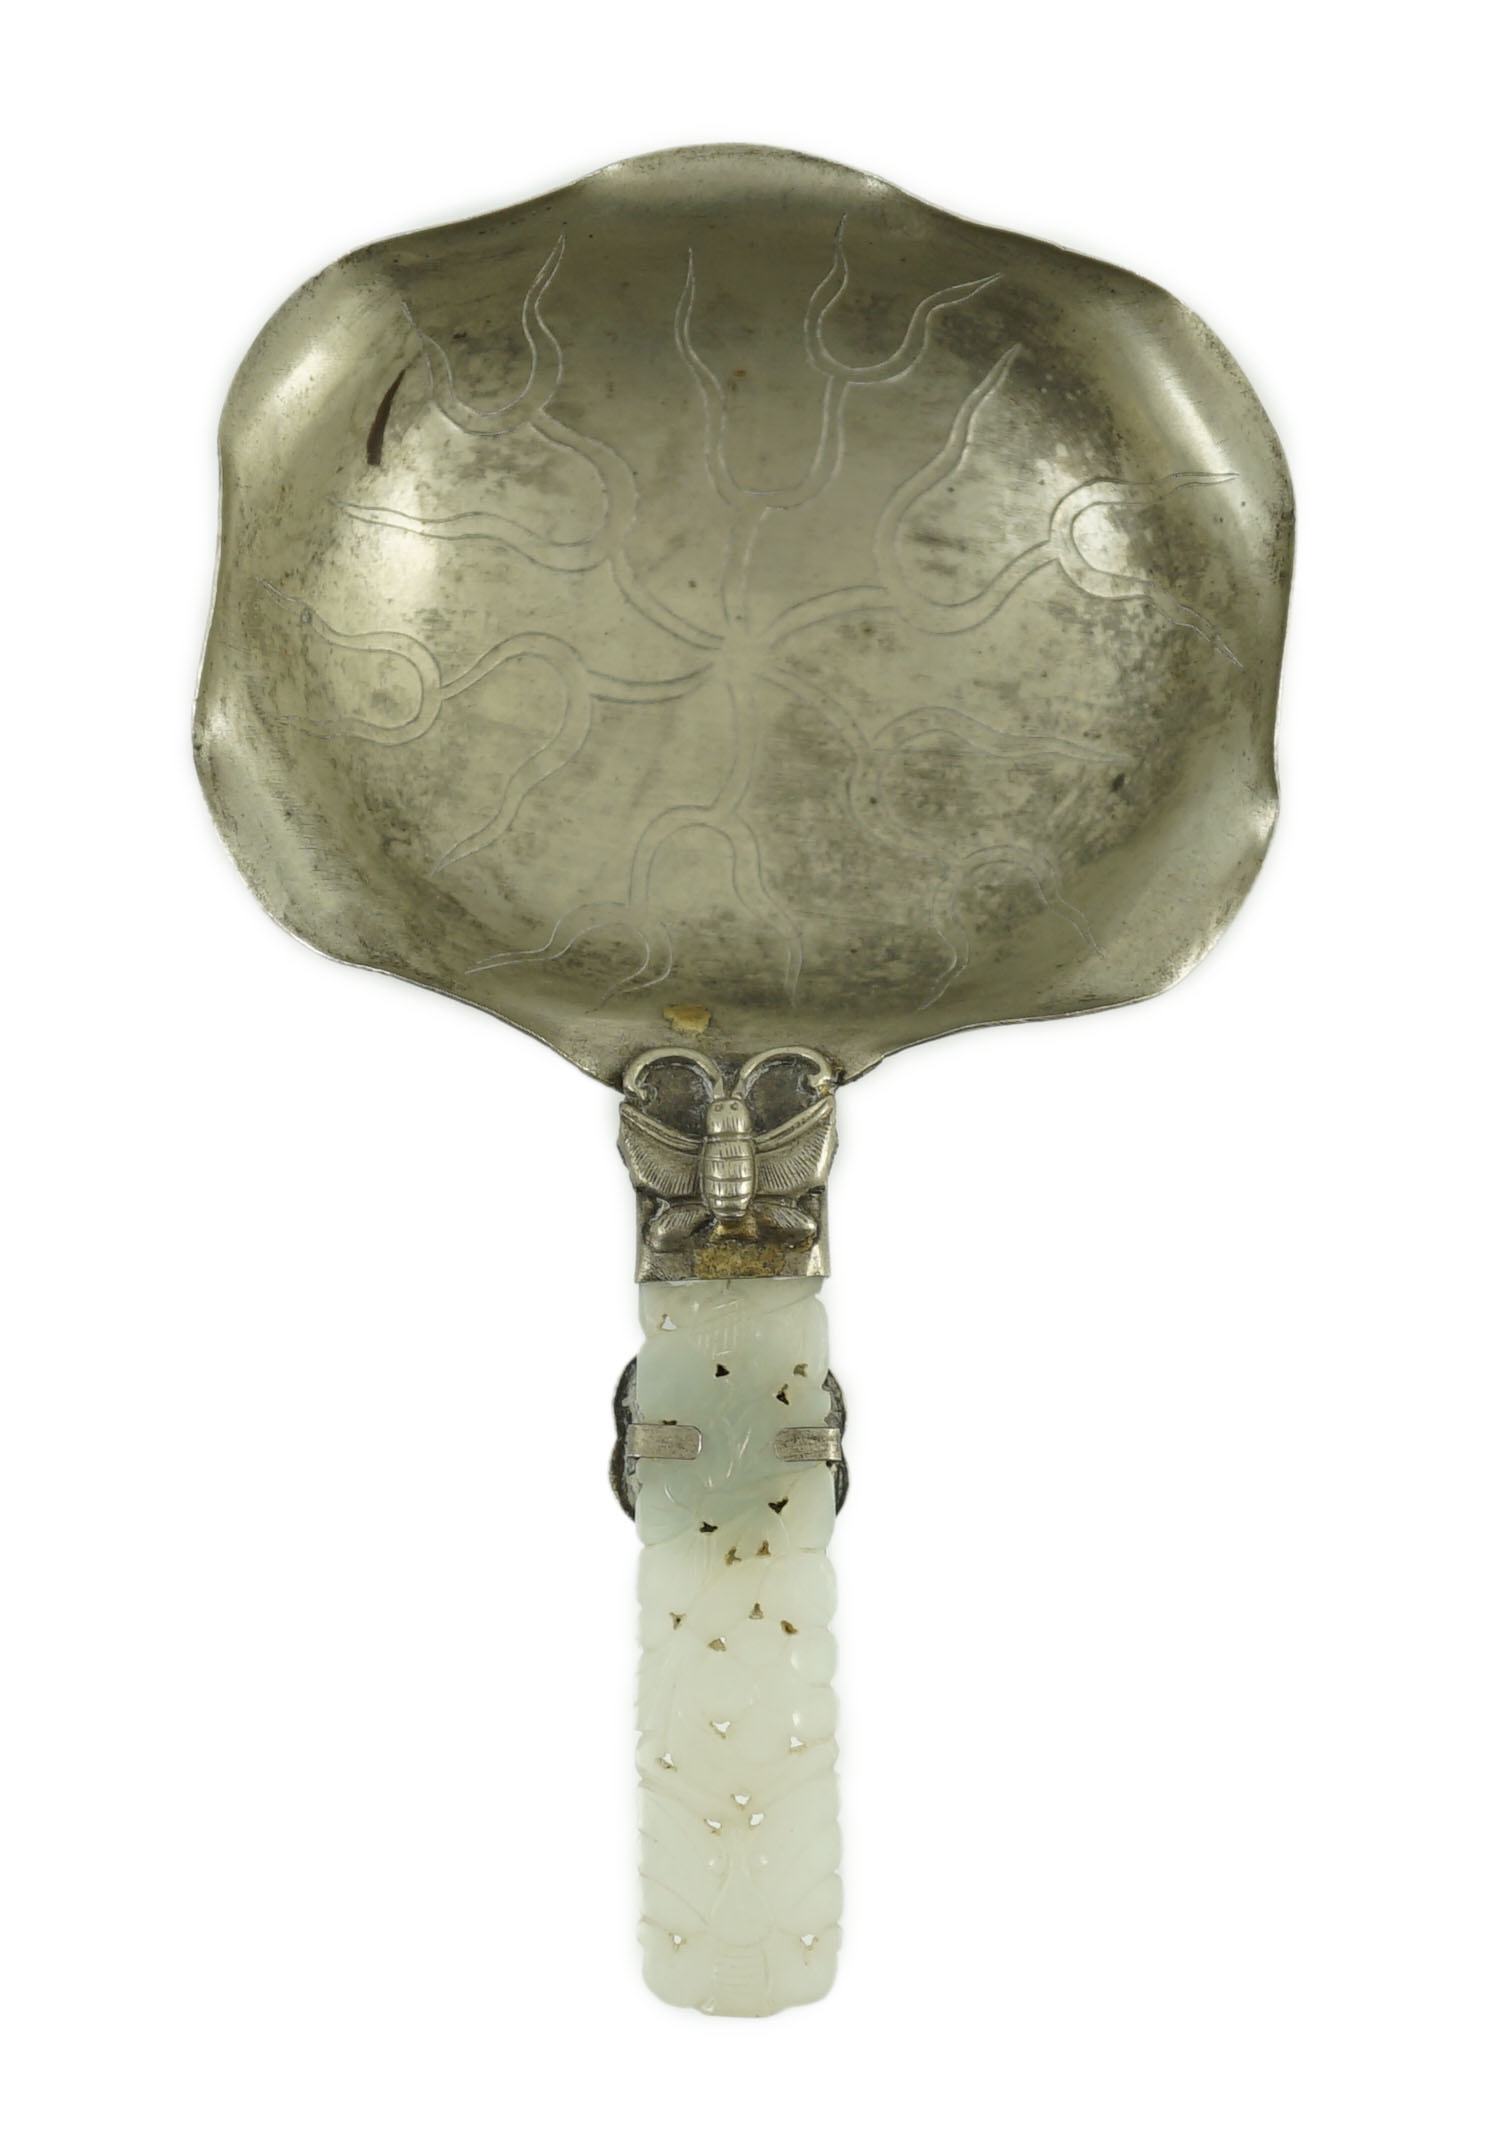 A Chinese Jade handled ladle - 14cm long